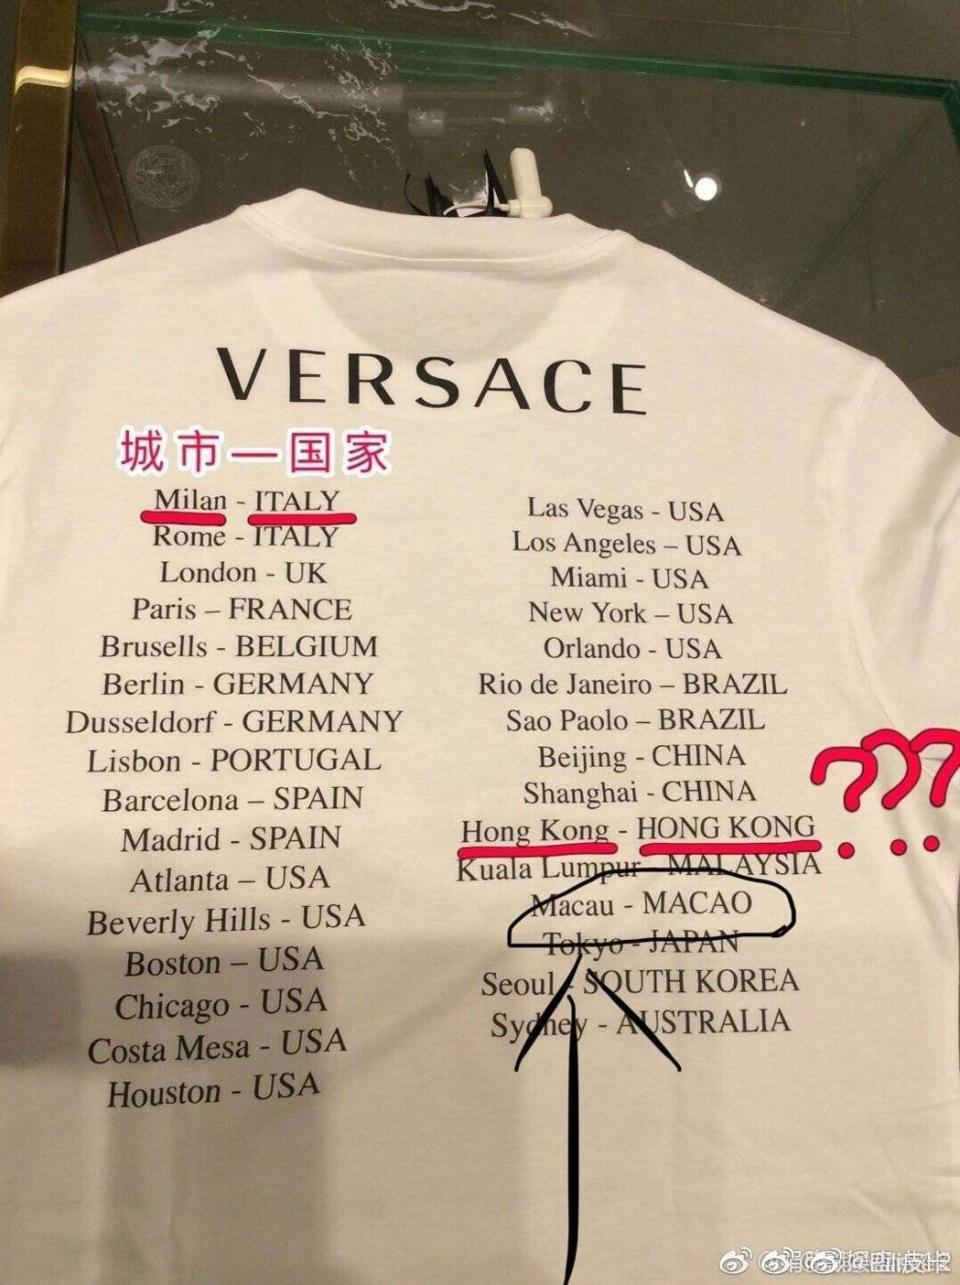 Image of a Versace T-shirt that circulated widely on China’s social media platform Weibo in 2019. Many Chinese see it mistakenly lists Macau and Hong Kong as separate countries from China.